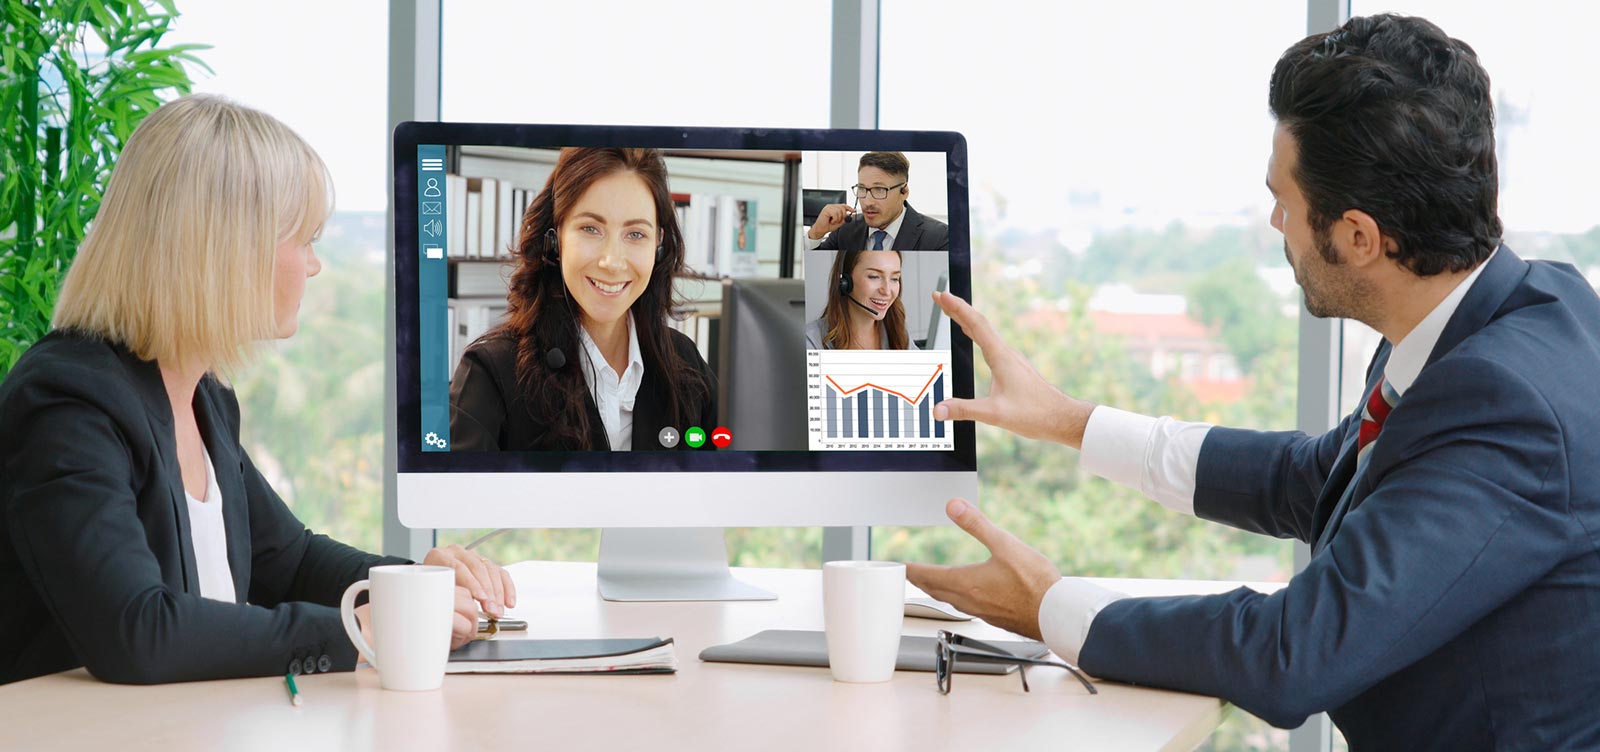 Clicking this image will load a page that describes the process of mediation by video conference.